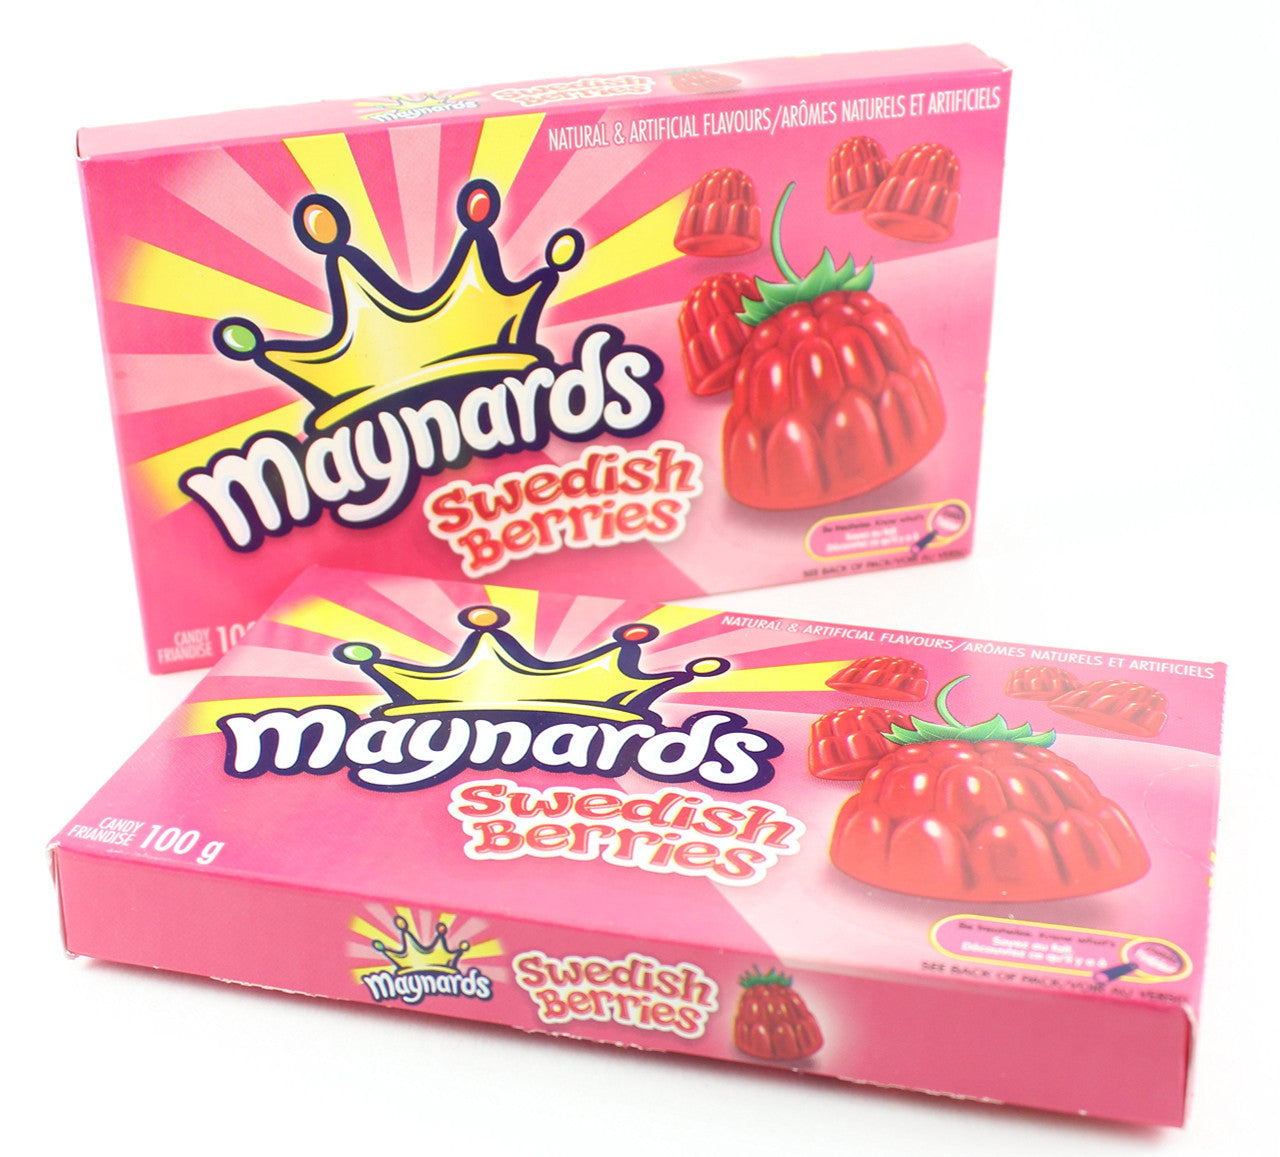 Maynards Swedish Berries Candy, 100g/3.5 oz, 2ct {Imported from Canada}